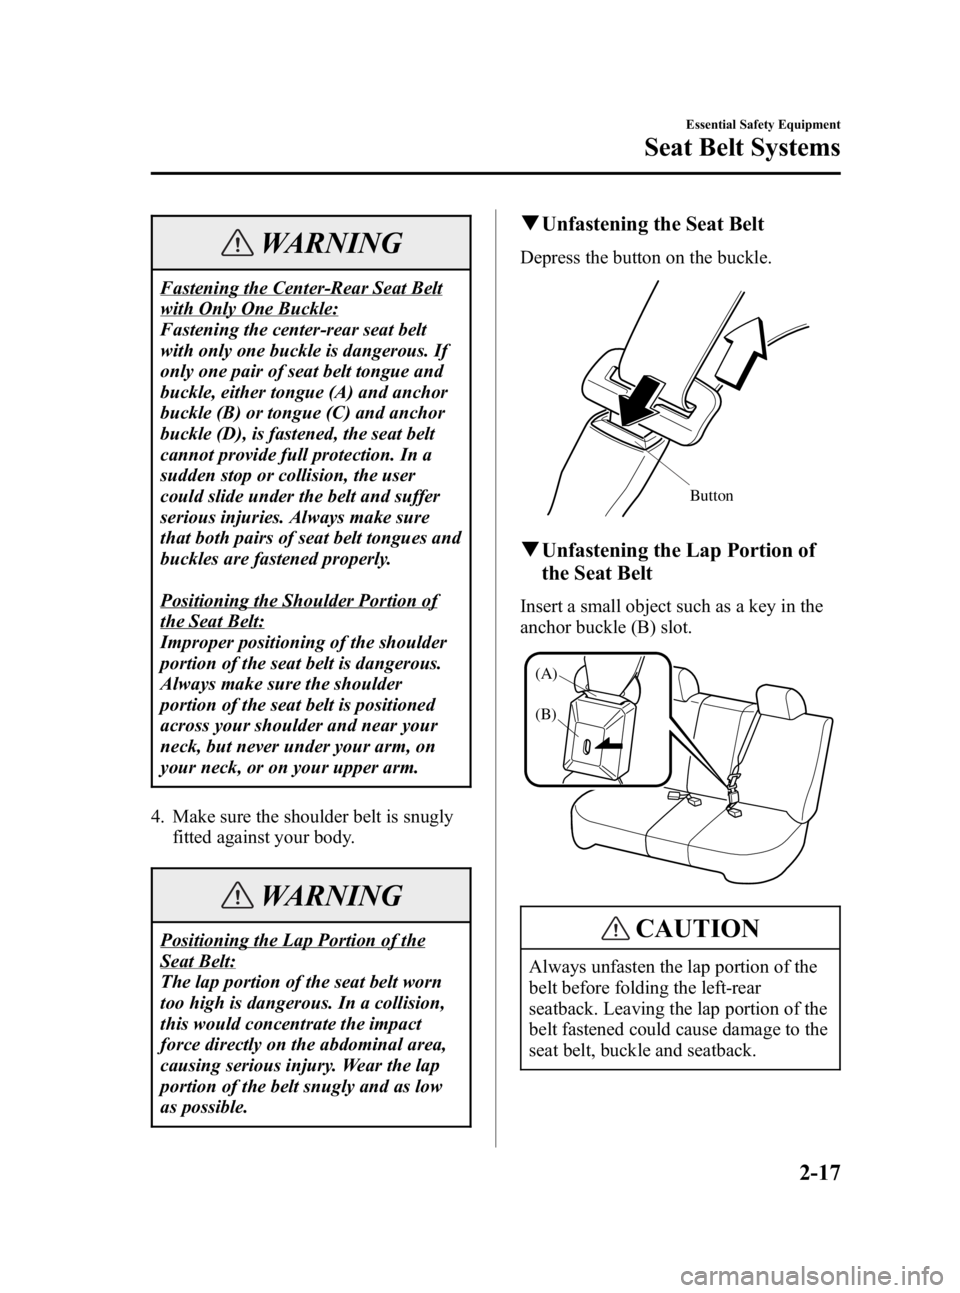 MAZDA MODEL 3 5-DOOR 2005 Owners Guide Black plate (31,1)
WARNING
Fastening the Center-Rear Seat Belt
with Only One Buckle:
Fastening the center-rear seat belt
with only one buckle is dangerous. If
only one pair of seat belt tongue and
buc